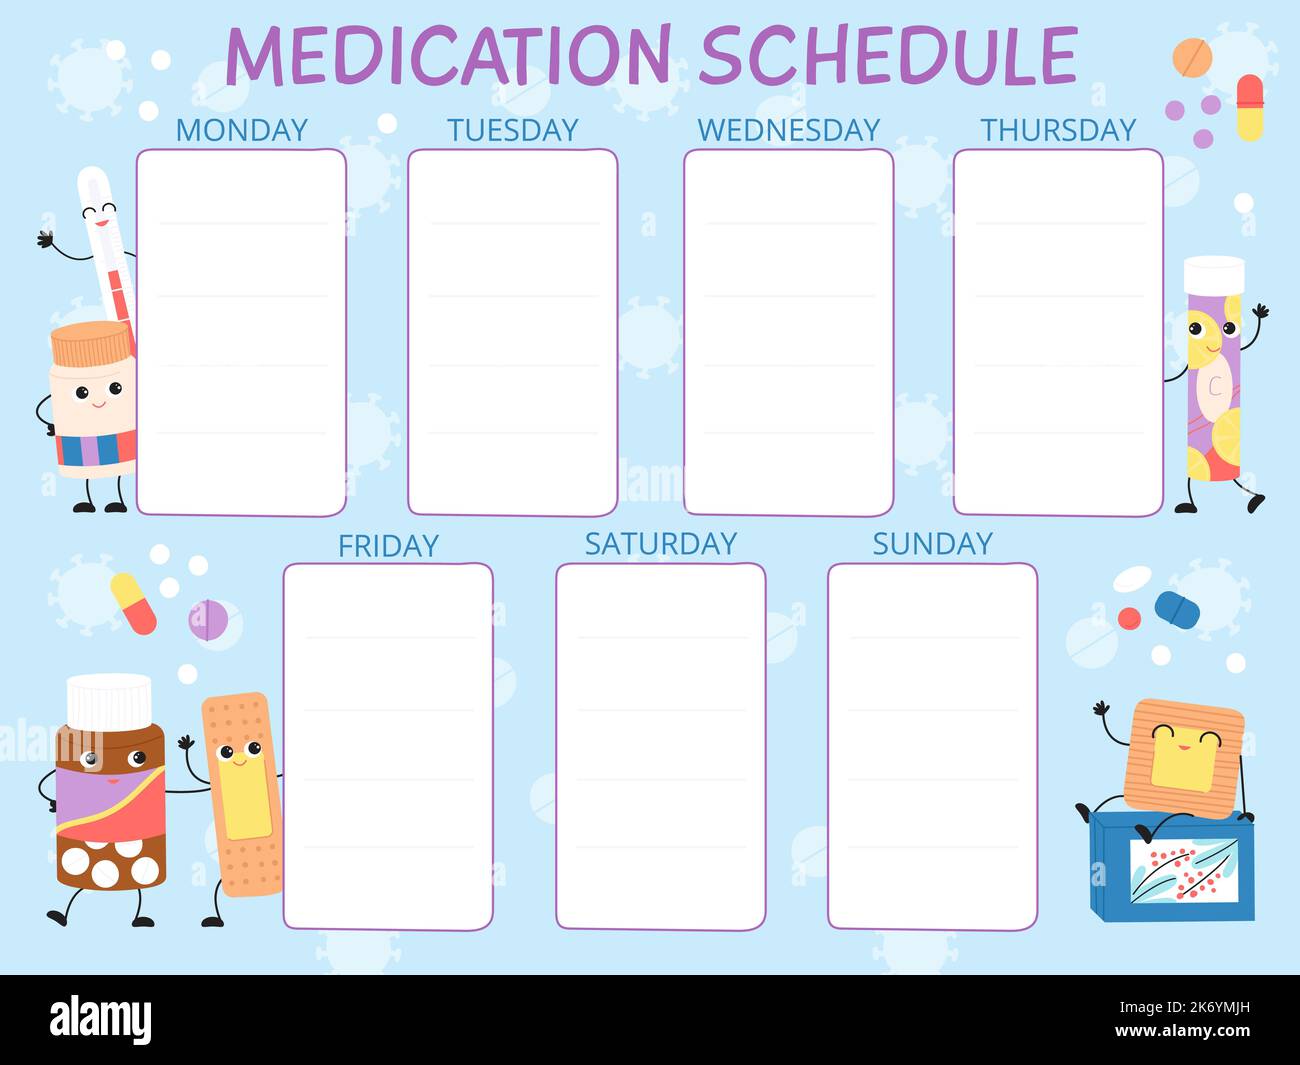 Medication schedule planner. Cute pills and drugs cartoon characters and blank sheets. Weekly medication list, childish or adults plan, decent vector Stock Vector